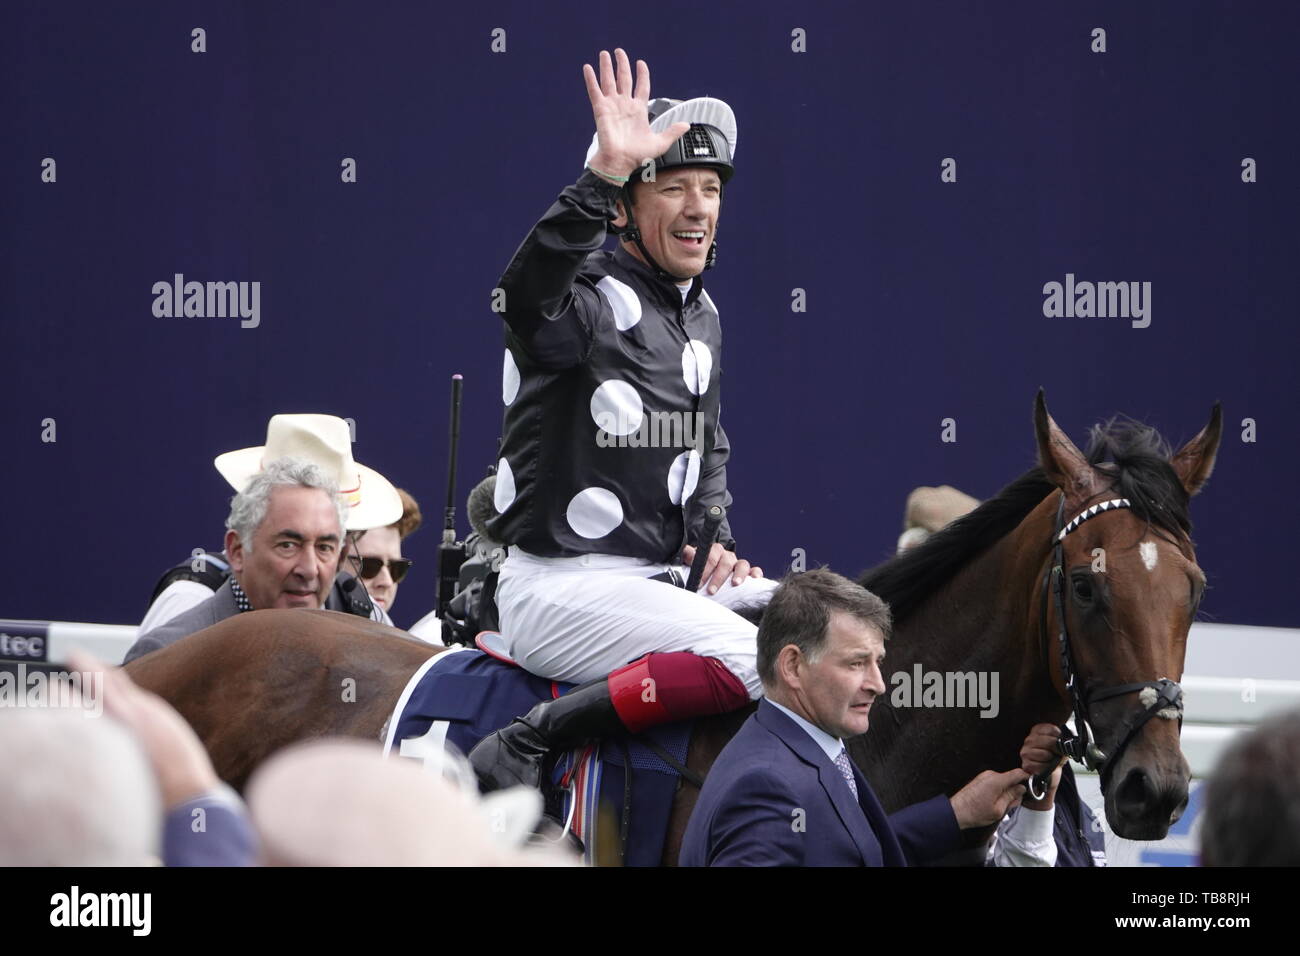 Epsom Downs, Surrey, UK. 31st May, 2019. Frankie Dettori on Anapura wins the Investec Oaks at the Investec Derby Festival - on Ladies Day, classic horse race. Credit: Motofoto/Alamy Live News Stock Photo